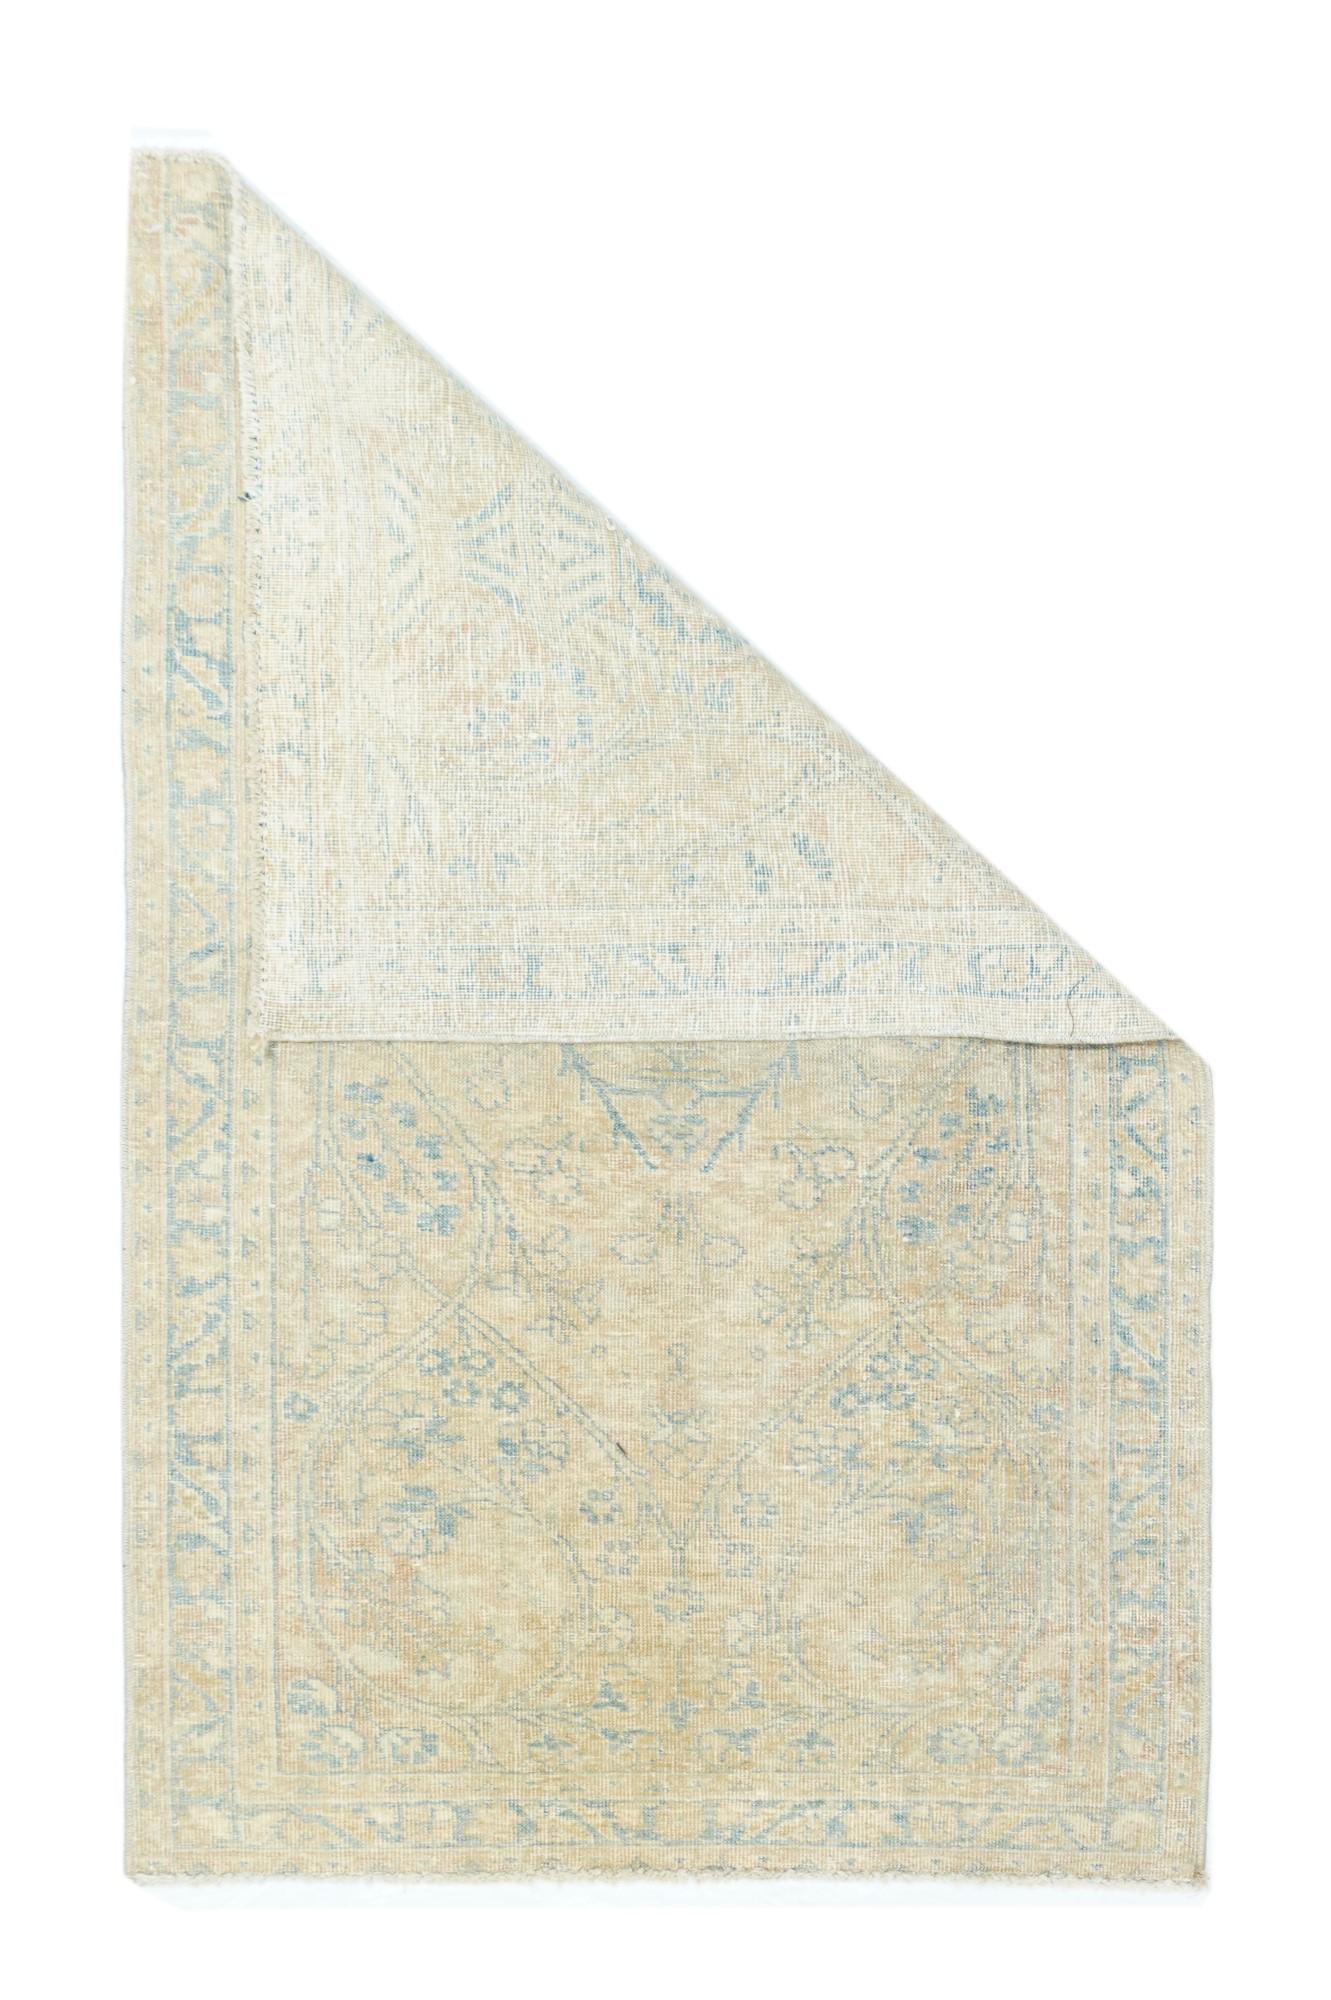 Vintage Tabriz rug 2'4'' x 4'. The evenly and almost distressed urban scatter is one of a pair, and shows a straw-rust field with lateral helix flowering branches, around a large, central light blue medallion. Light blue border of palmettes and